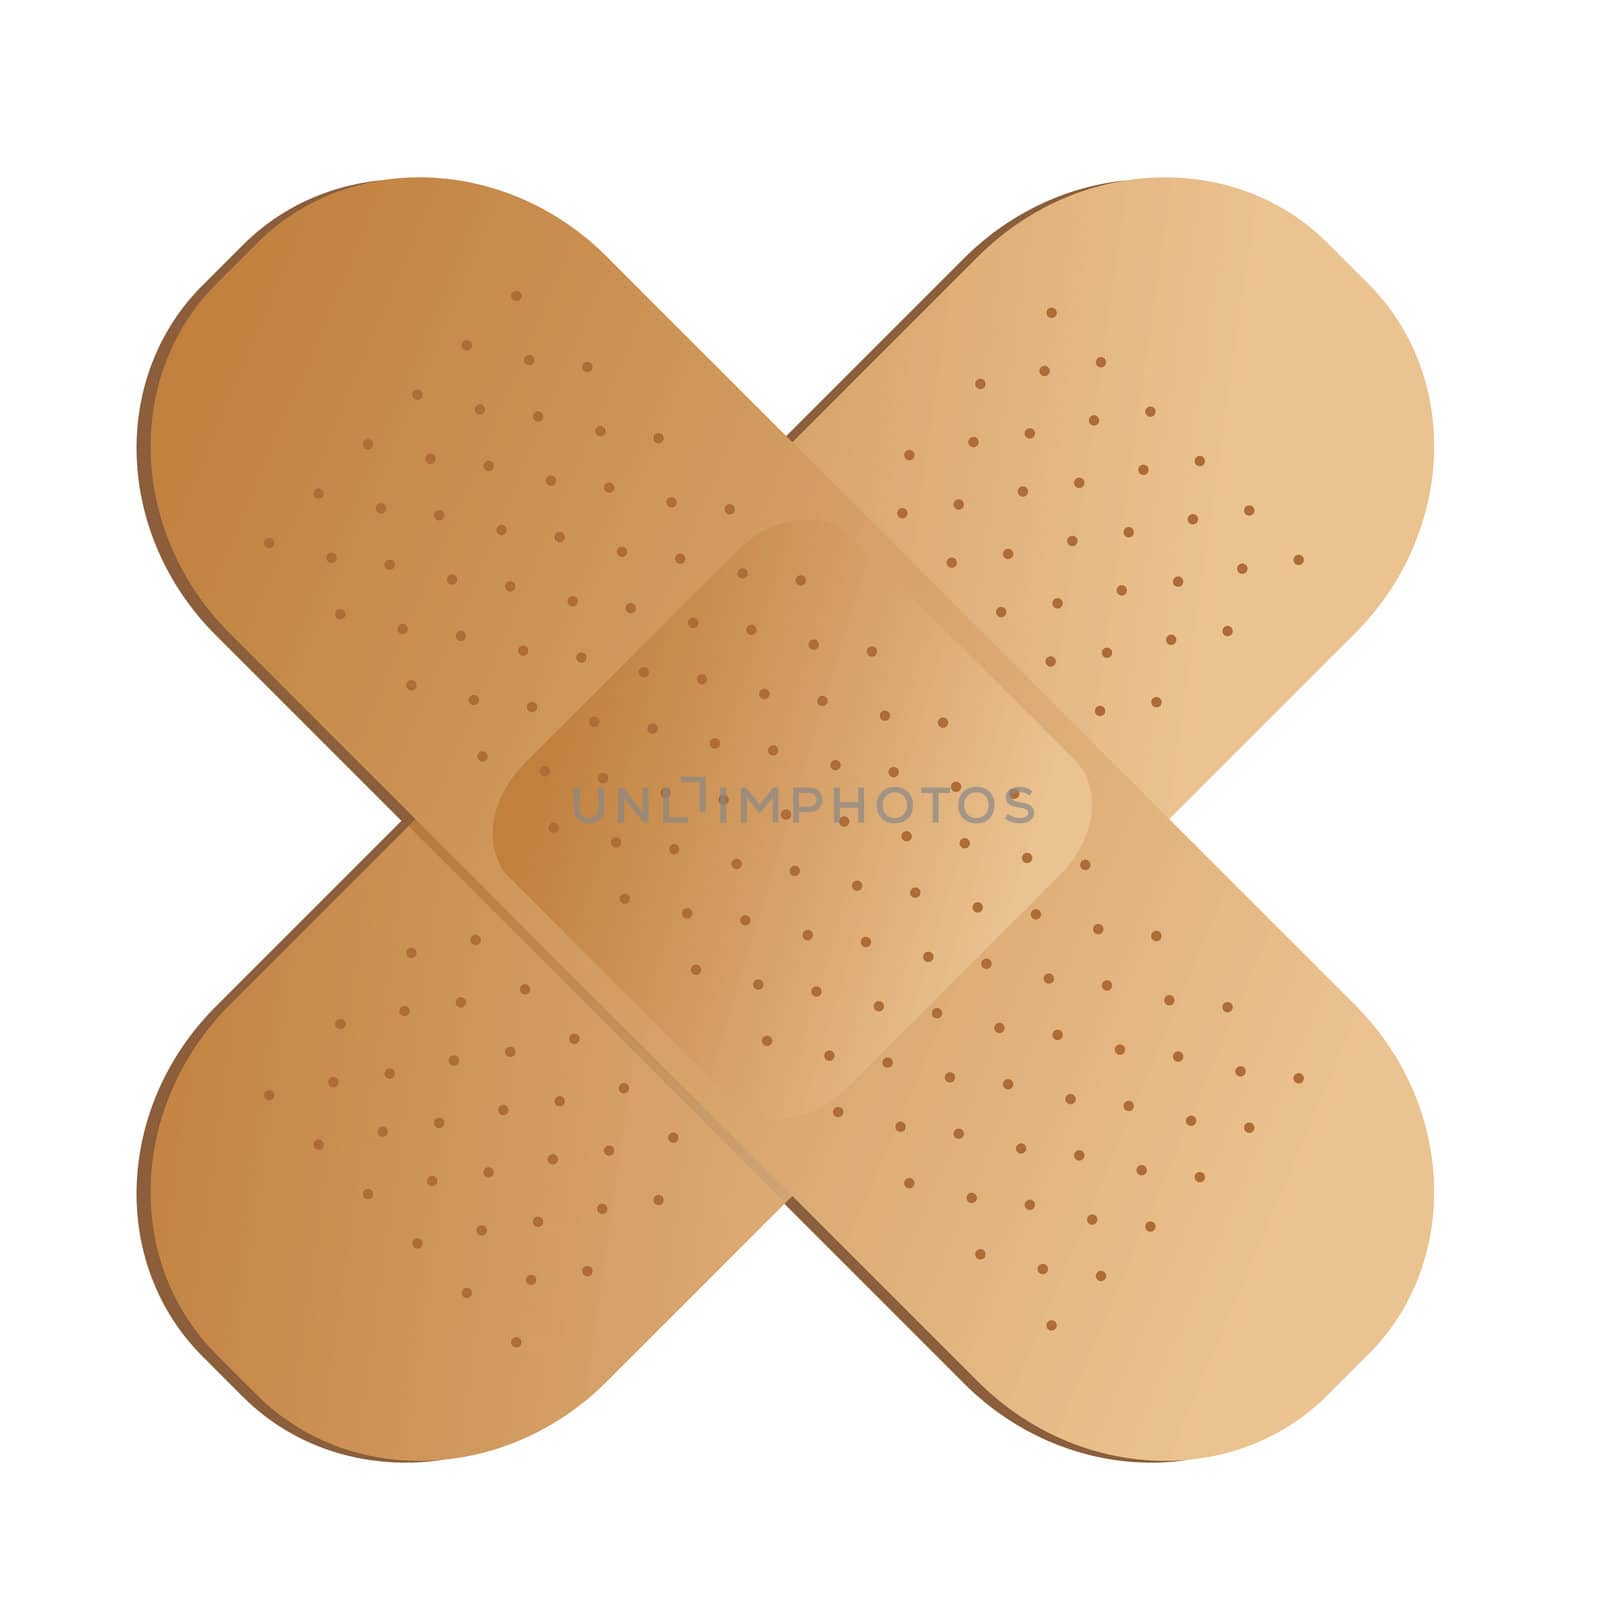 Two illustrated band aids cross with a drop shadow